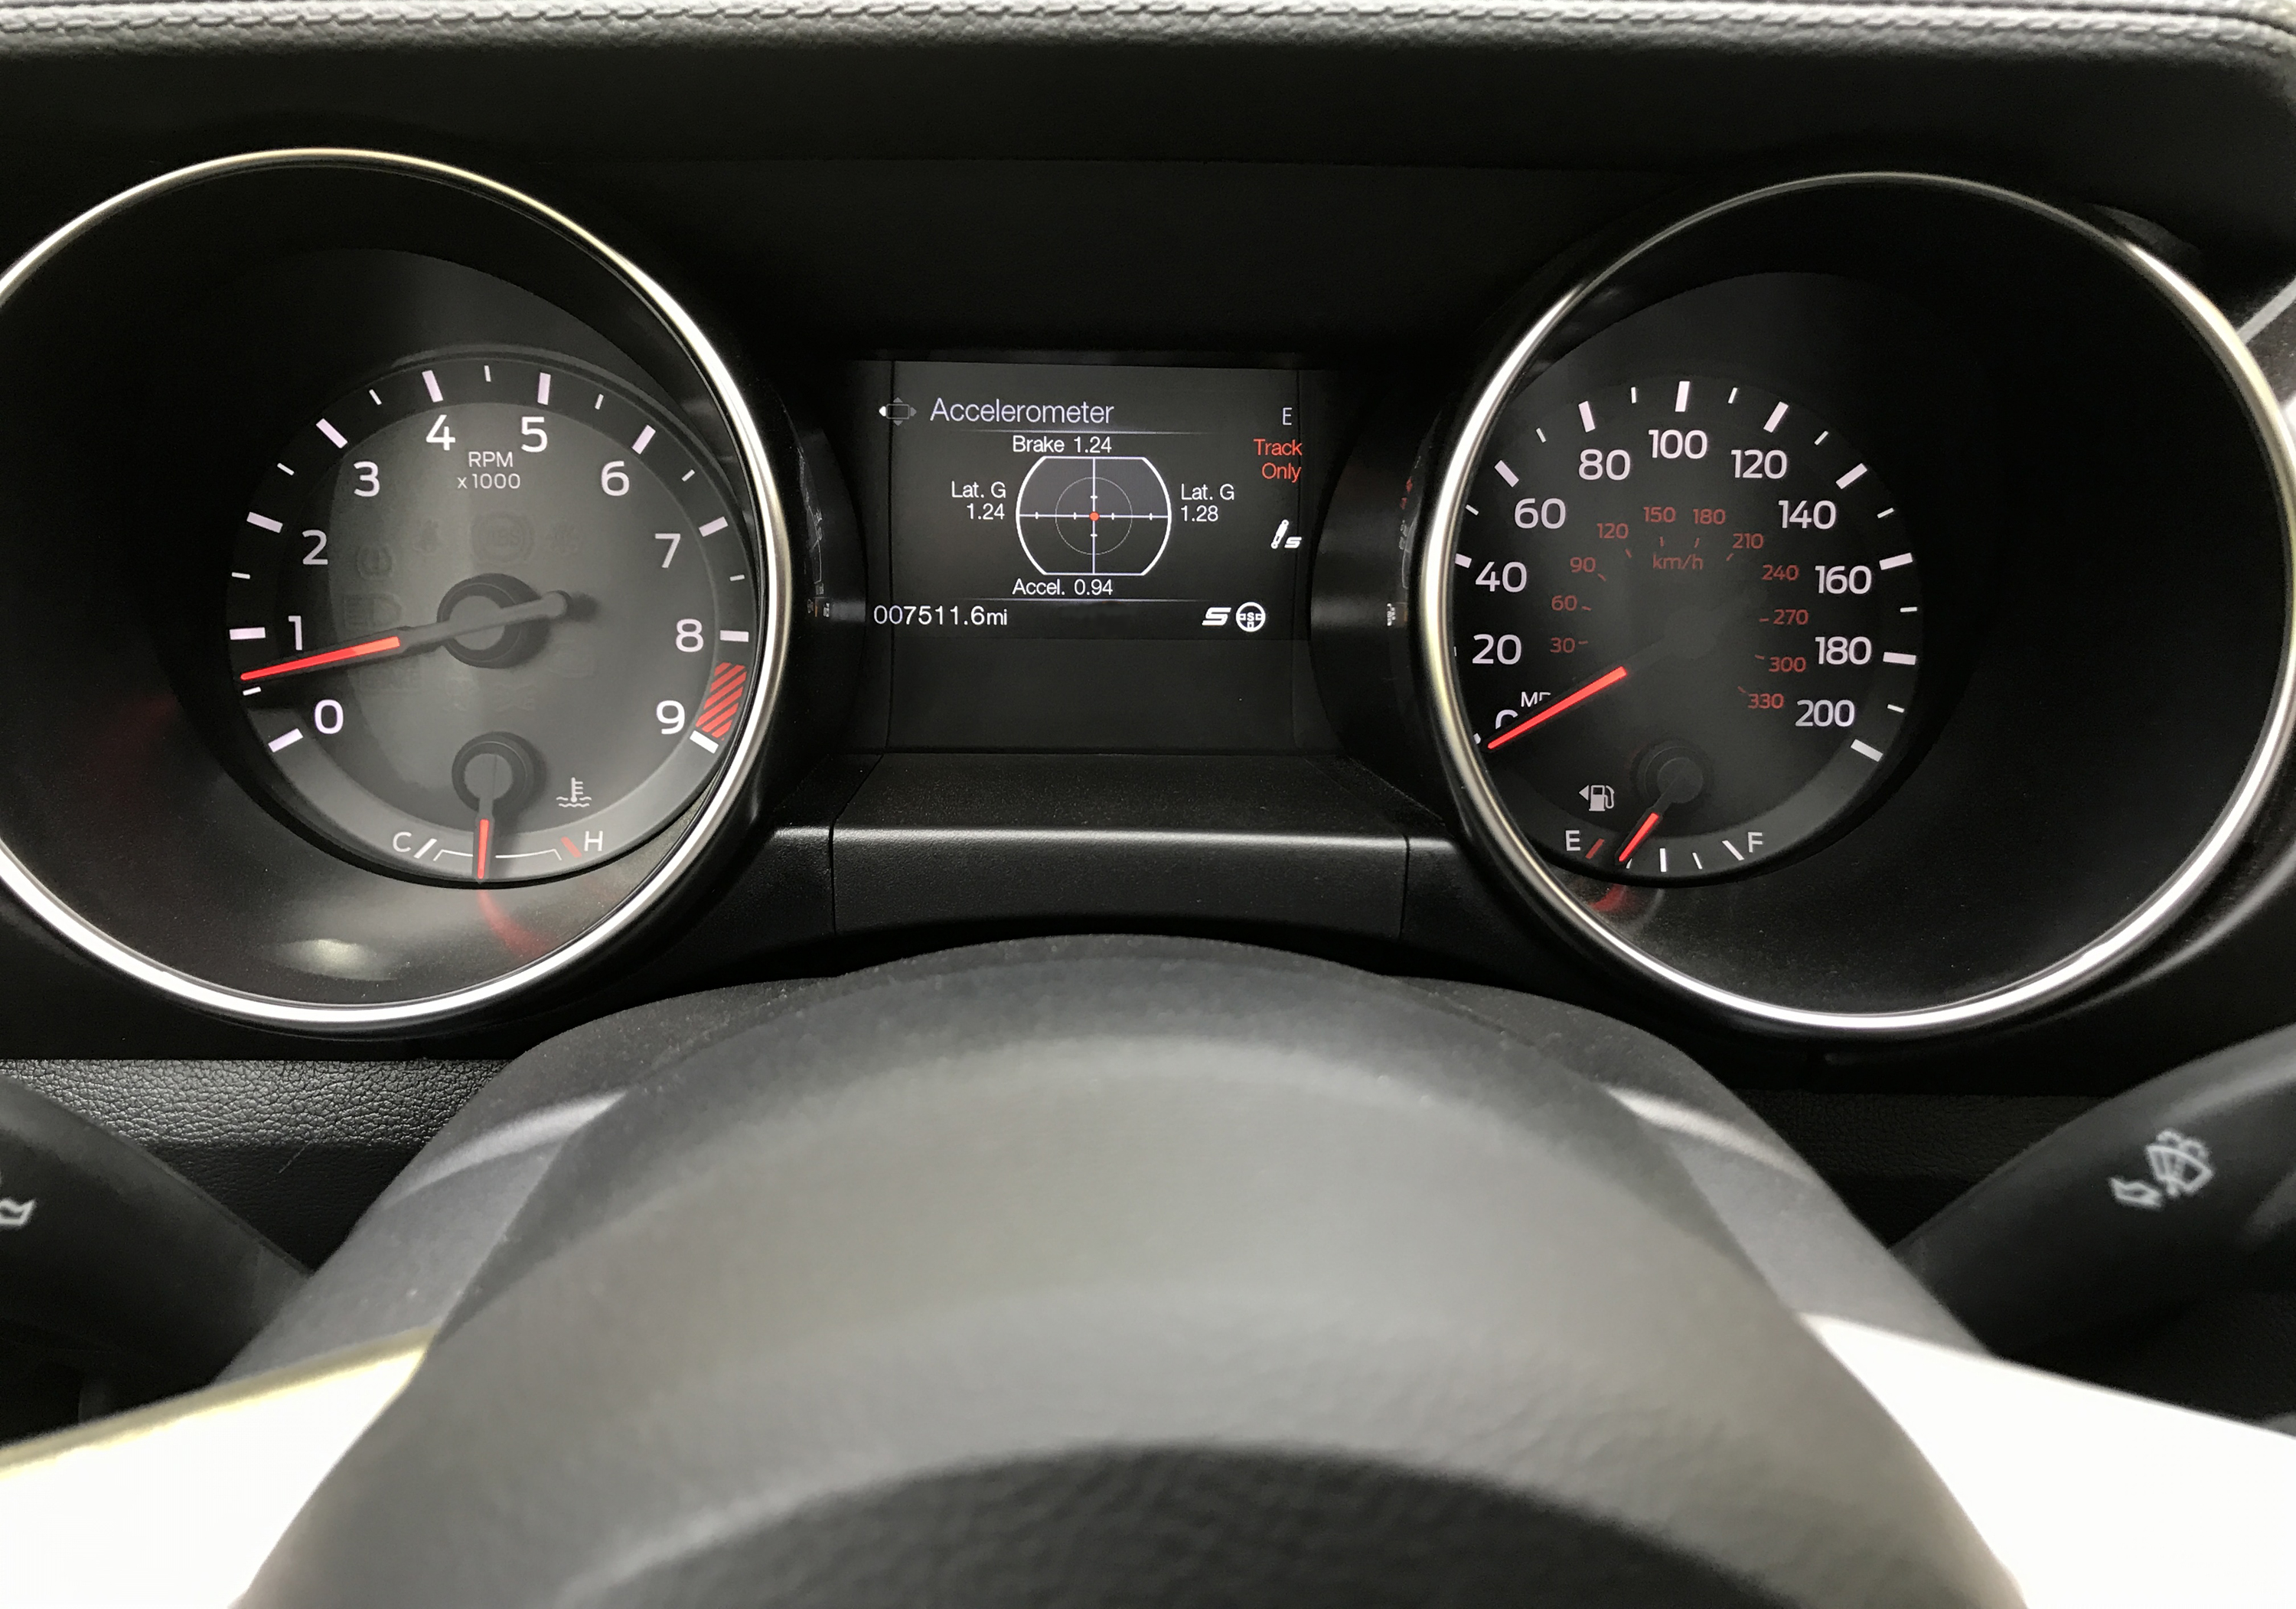 2017 Ford Mustang Shelby GT350R Gauges